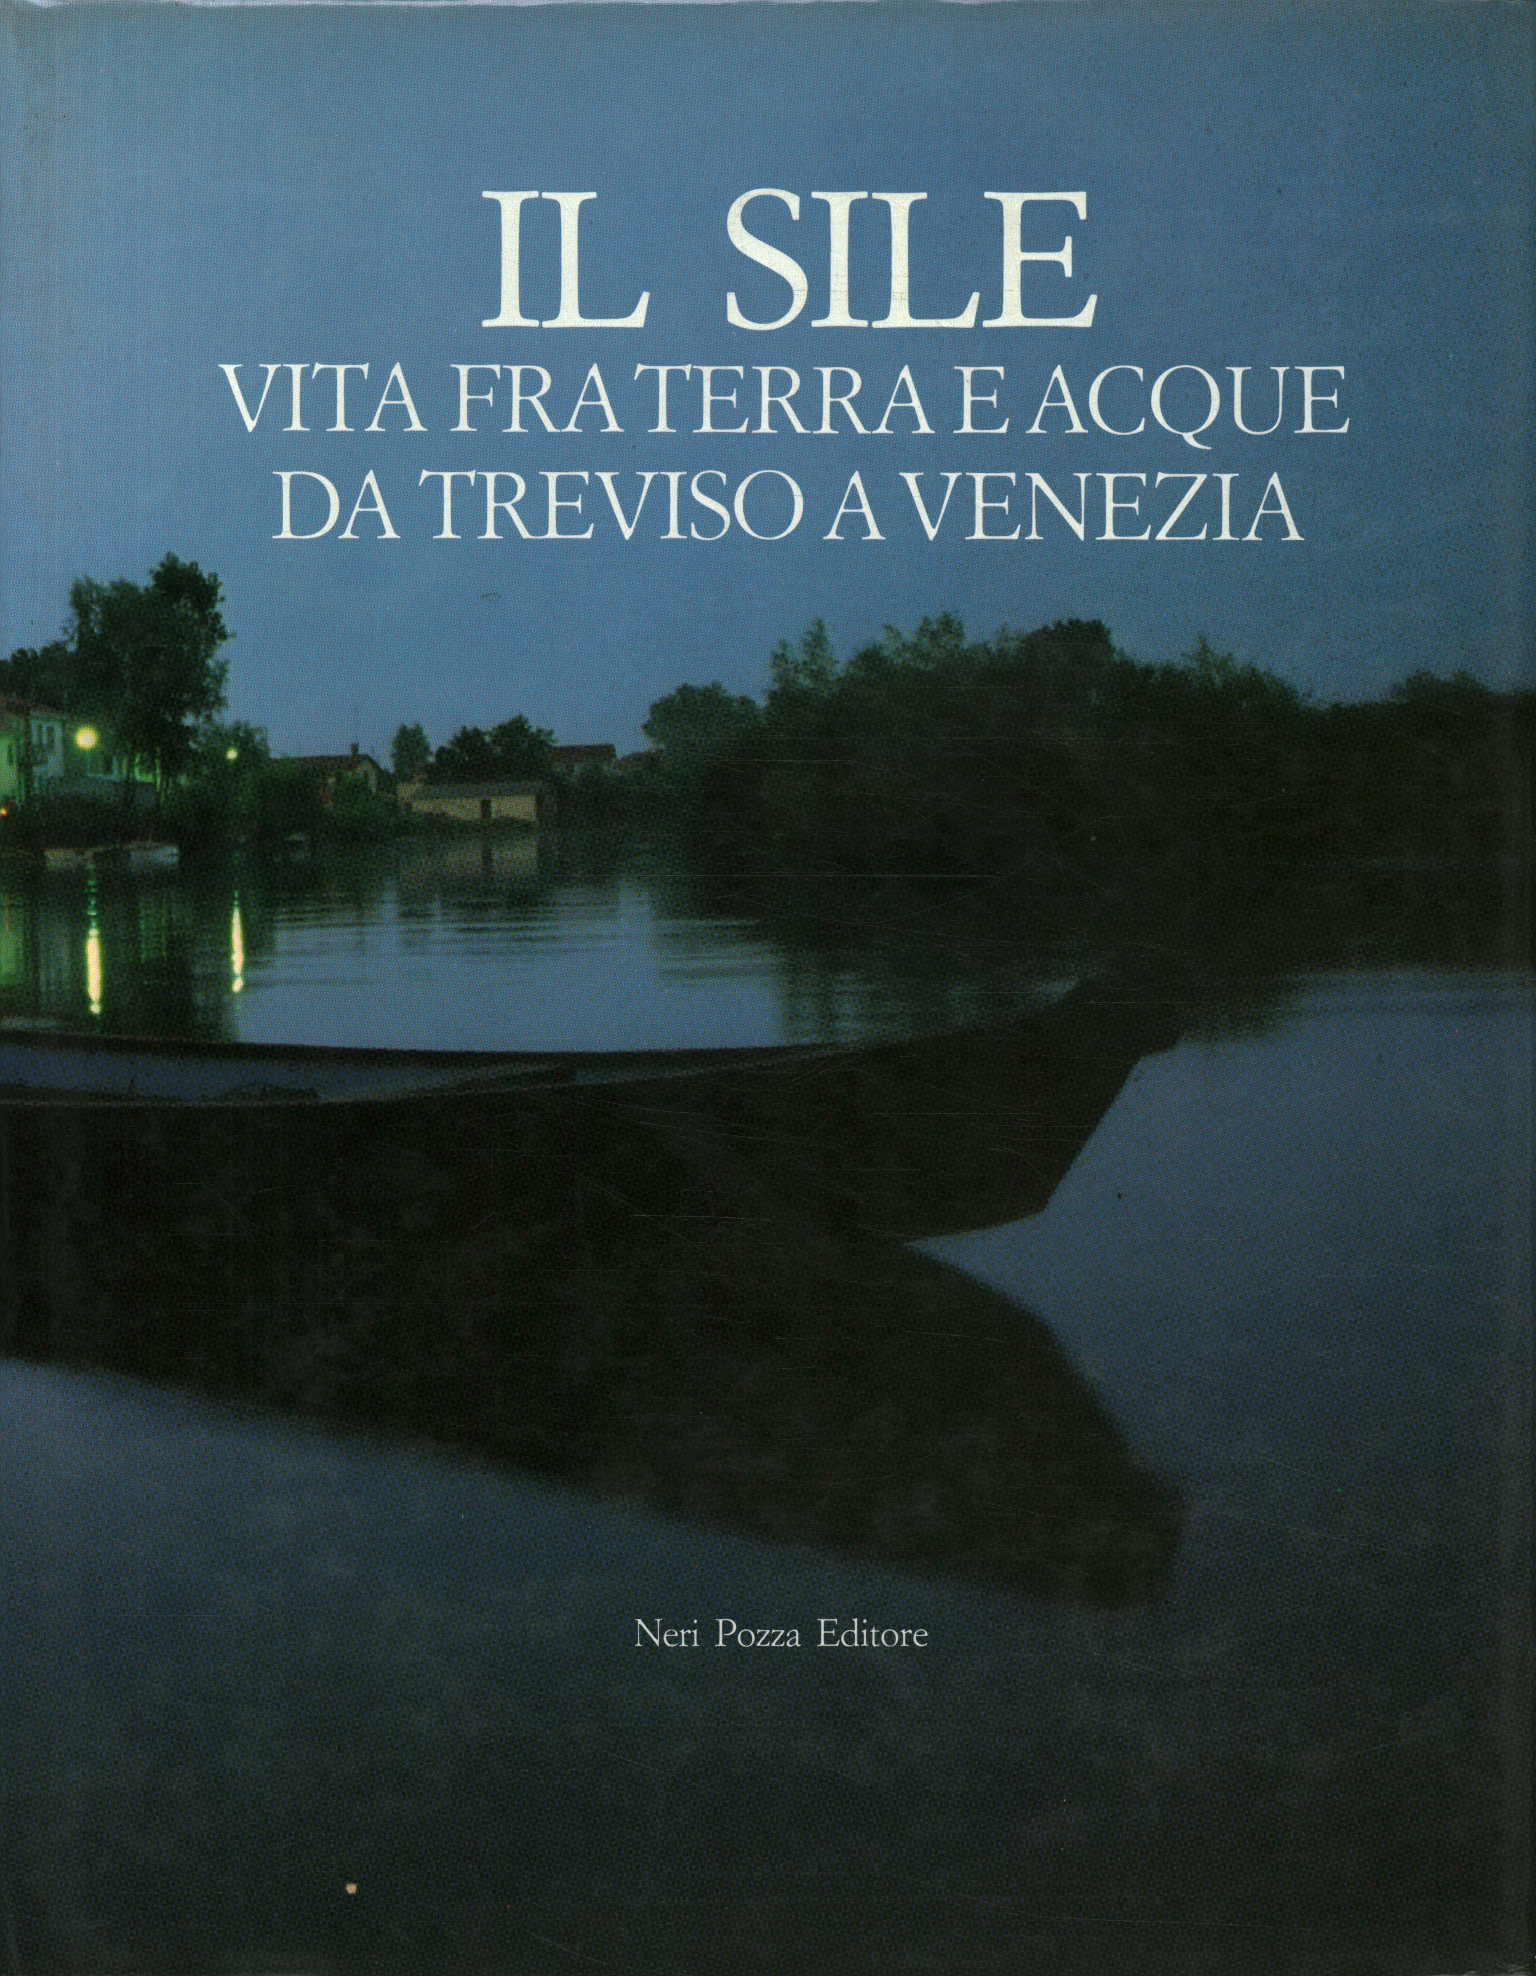 The sile